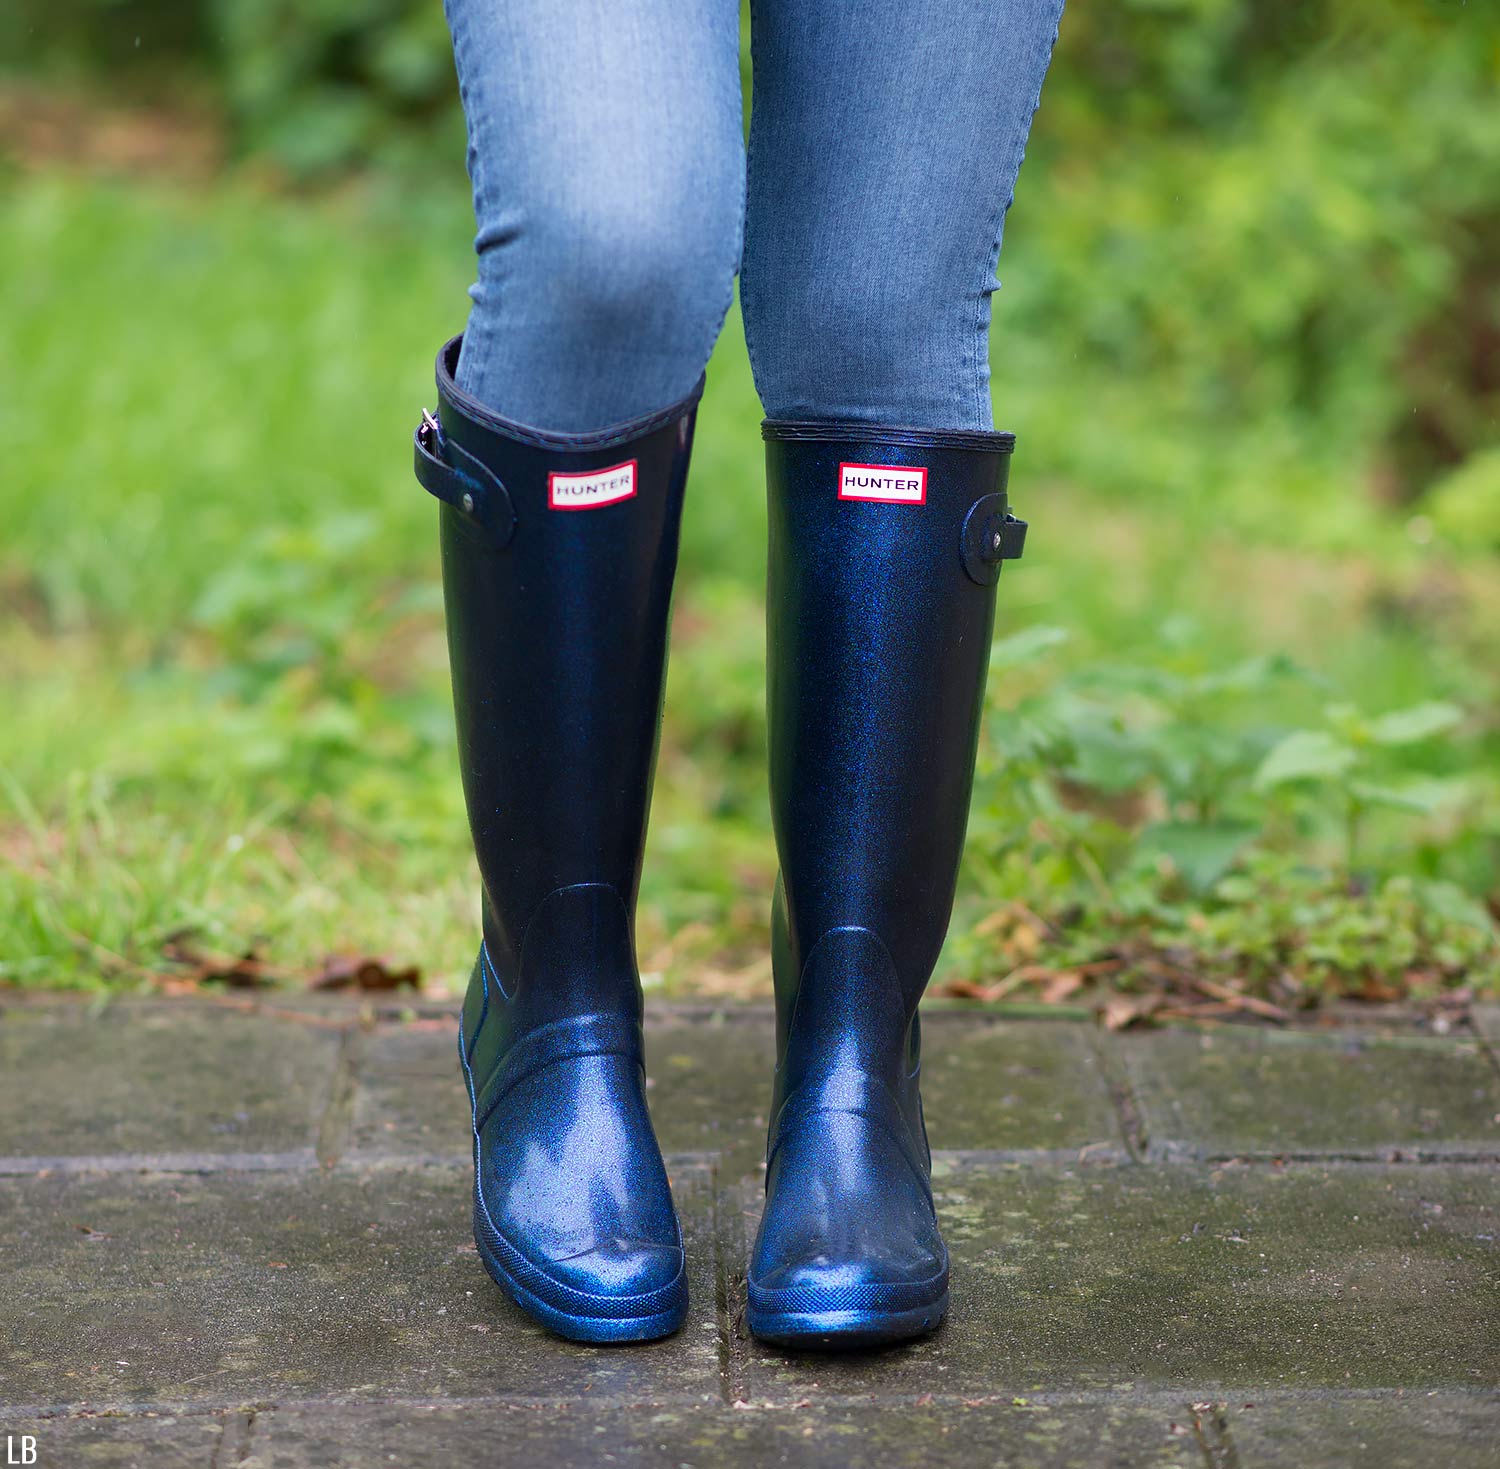 wellies rubber boots